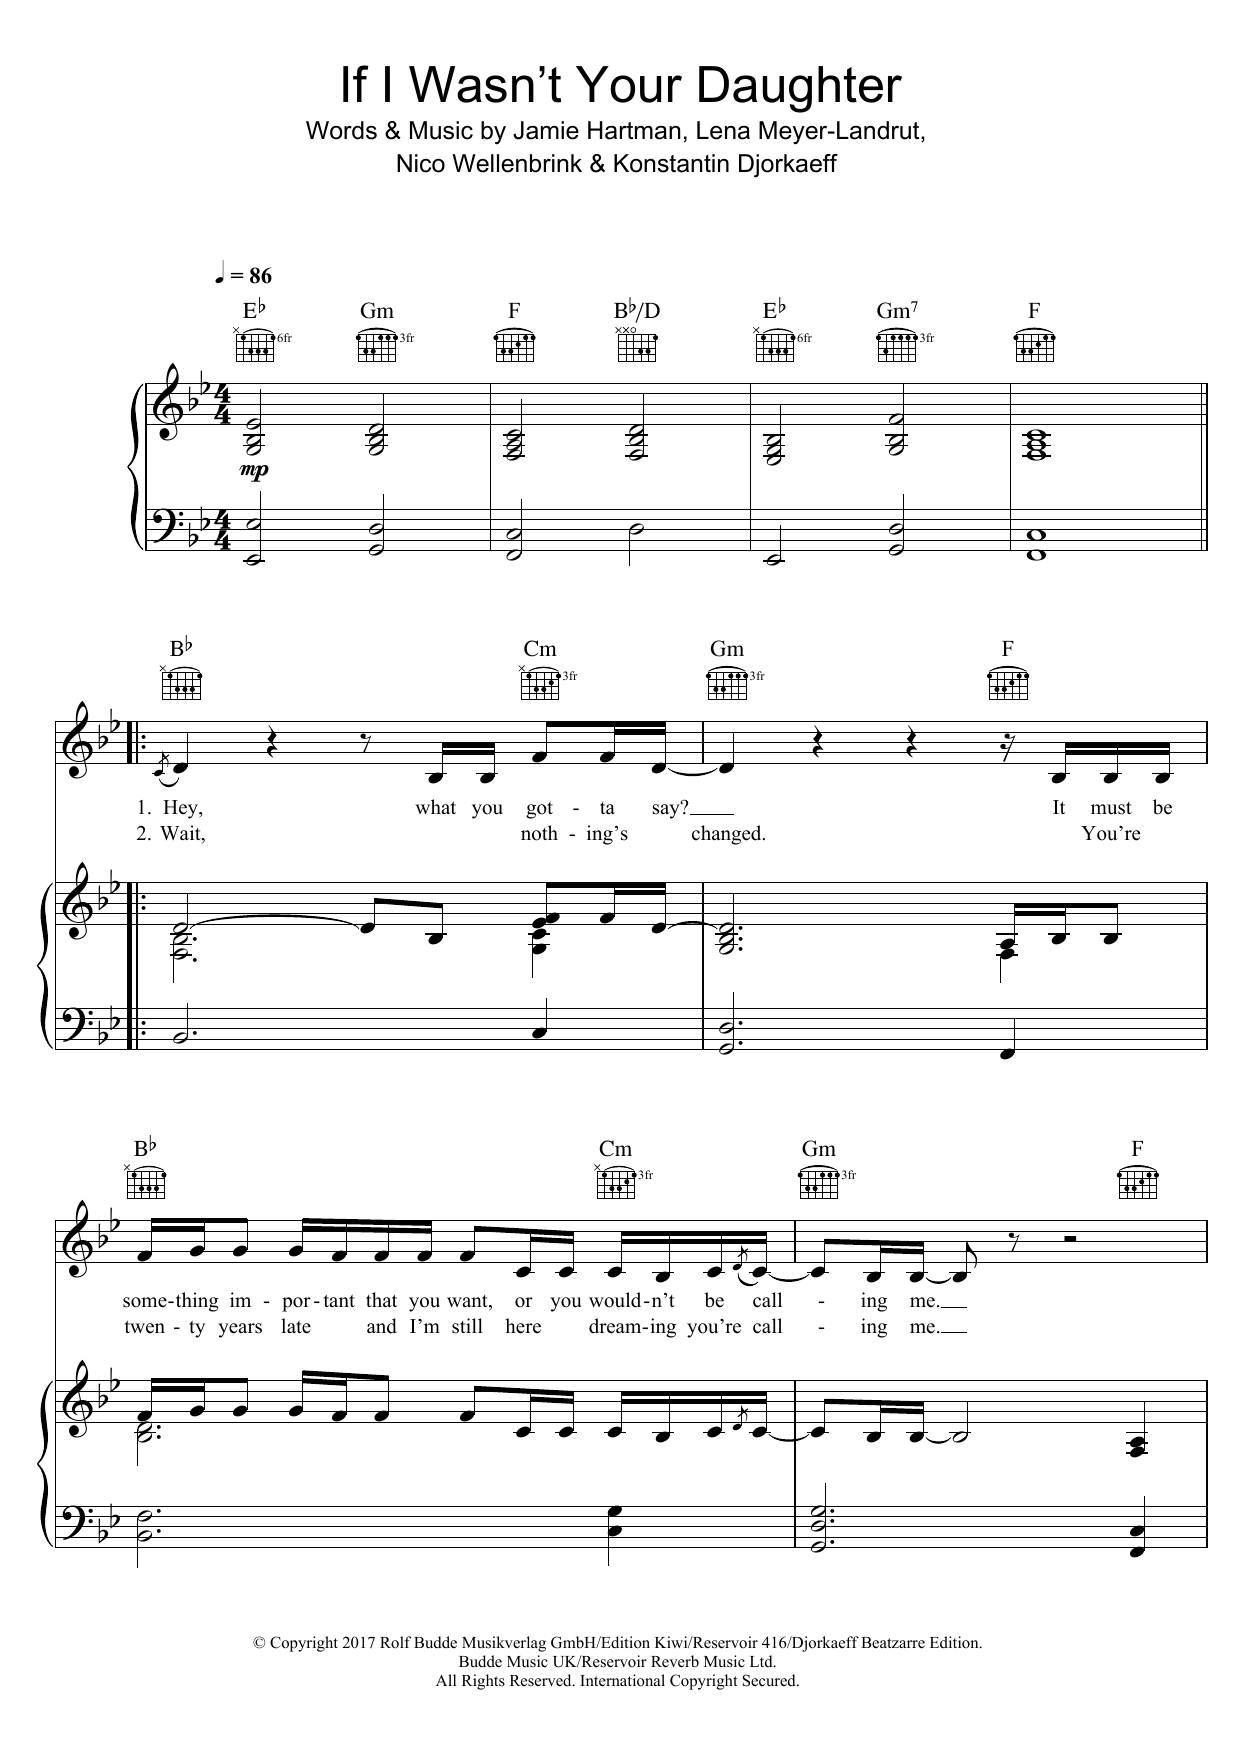 Lena If I Wasn't Your Daughter sheet music notes and chords. Download Printable PDF.